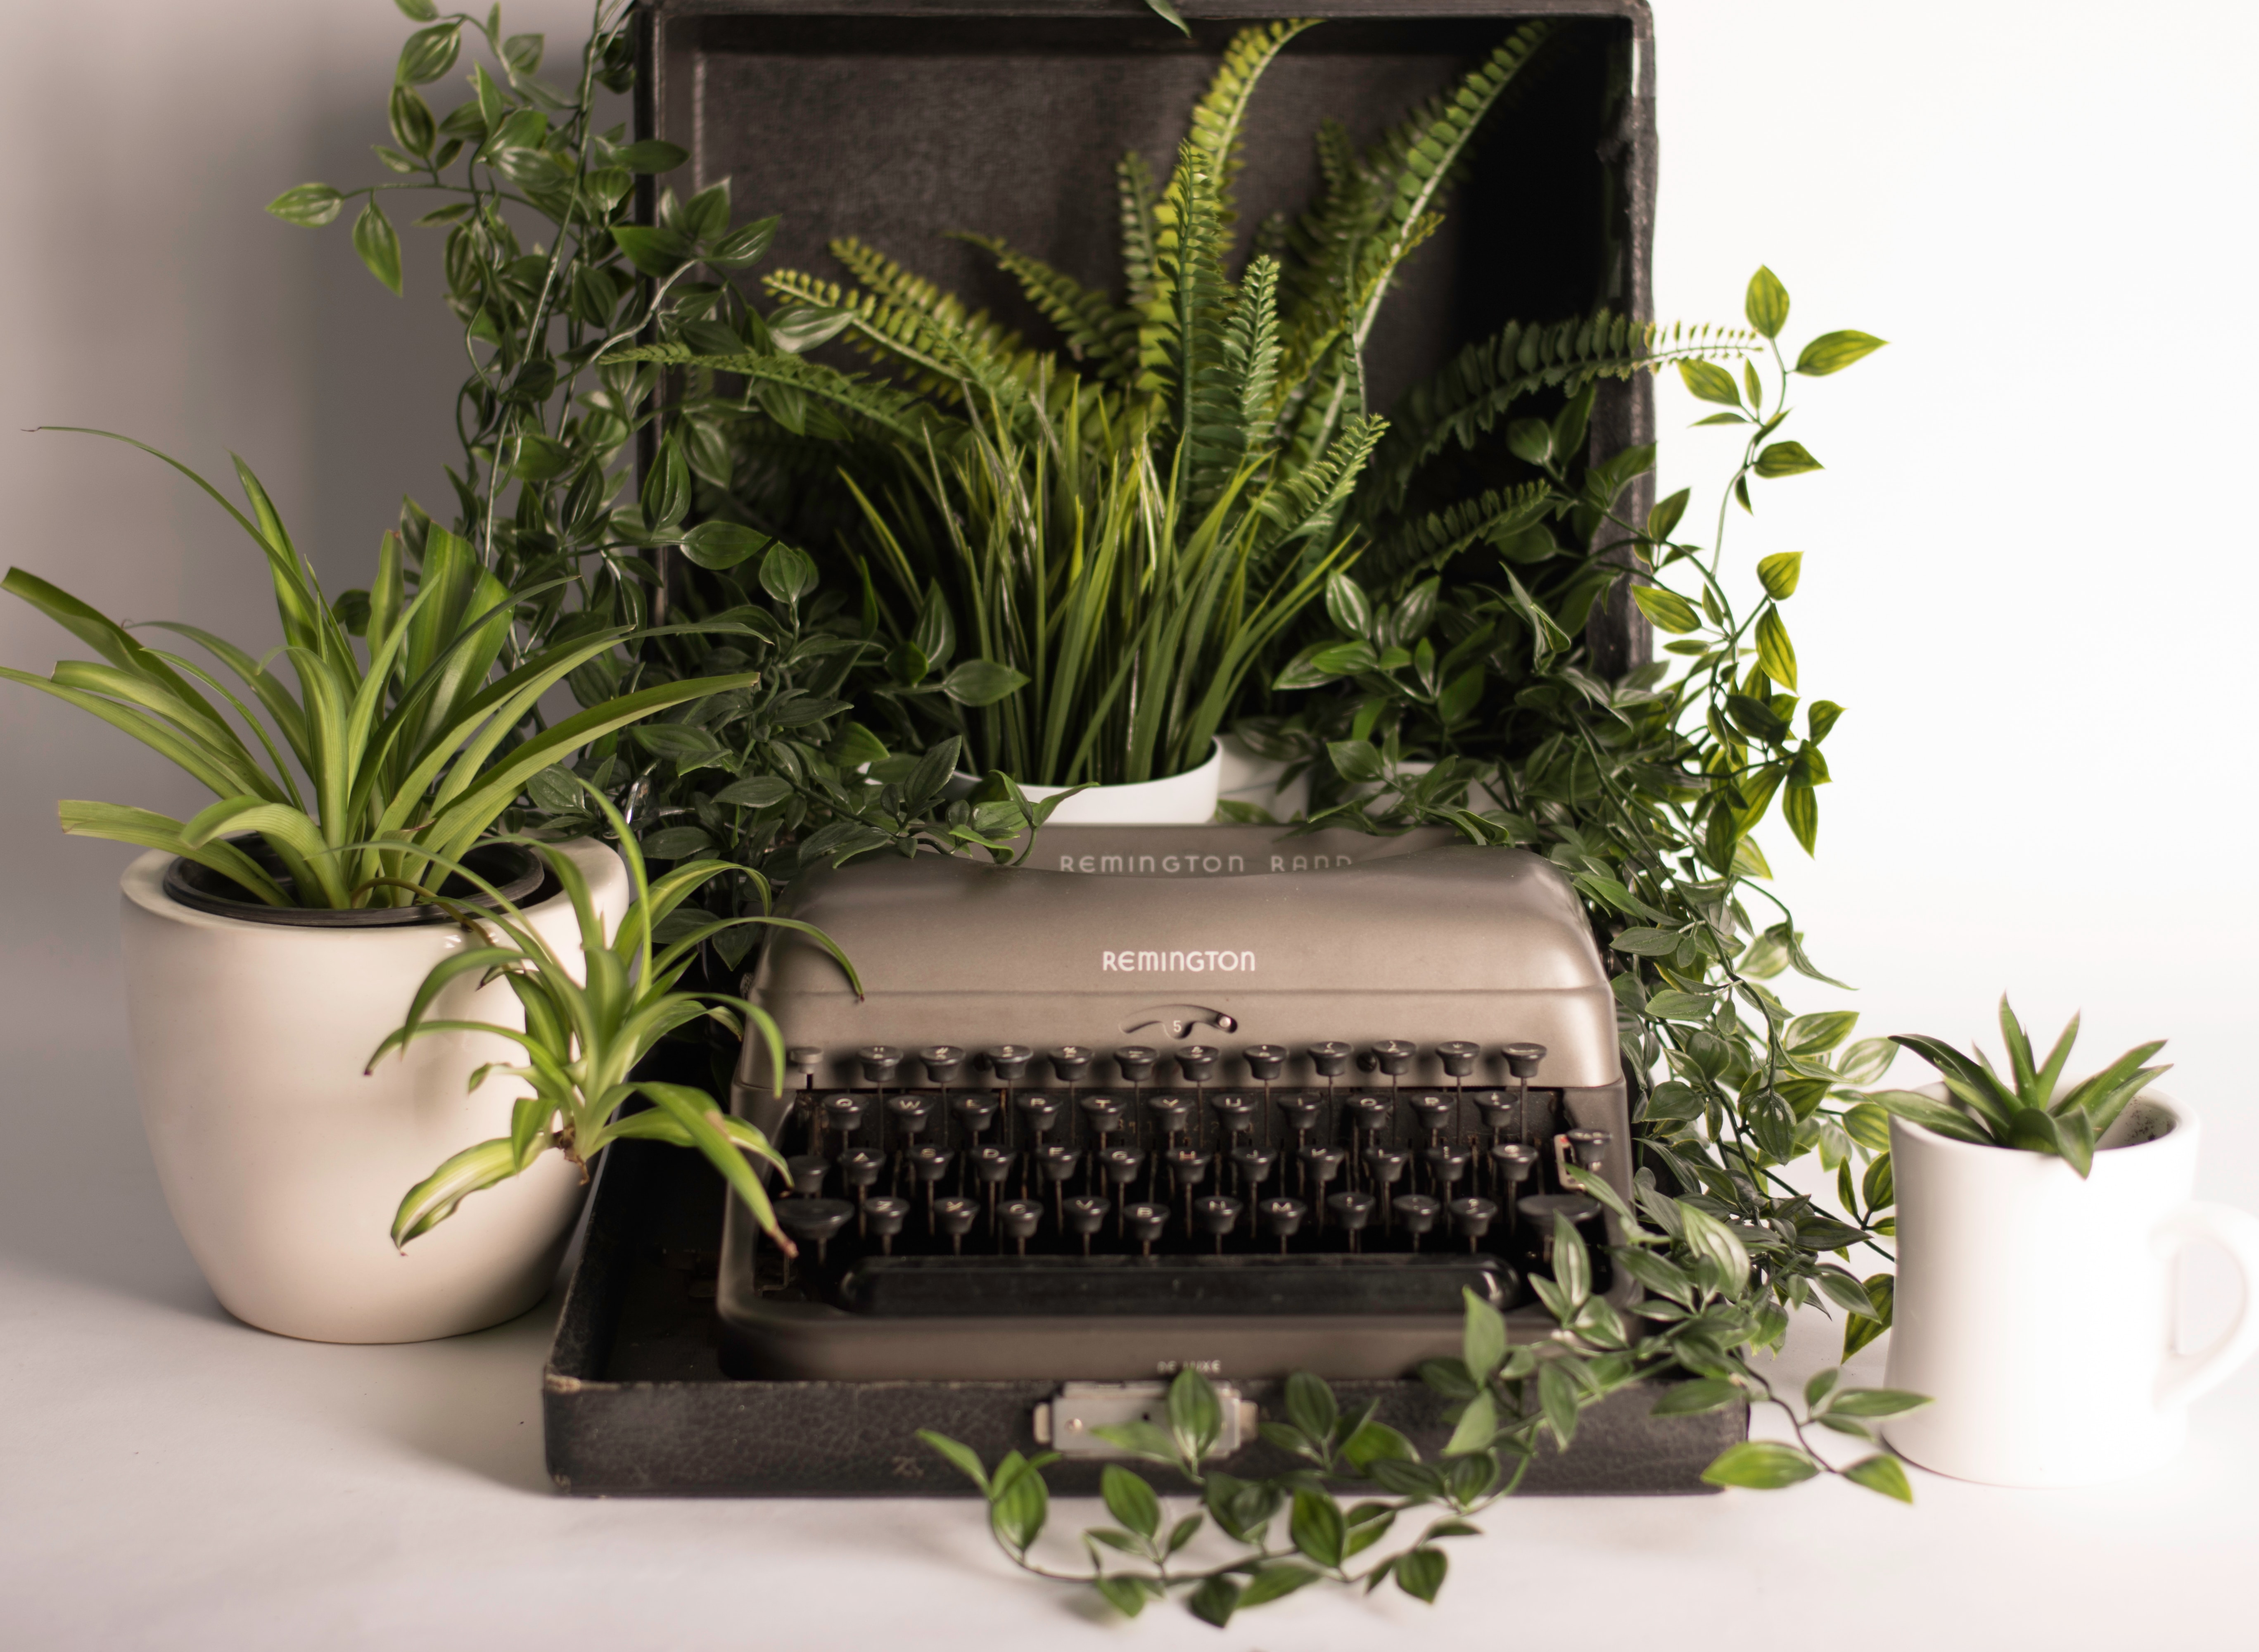 Simple grey typewriter with lots of green plants.